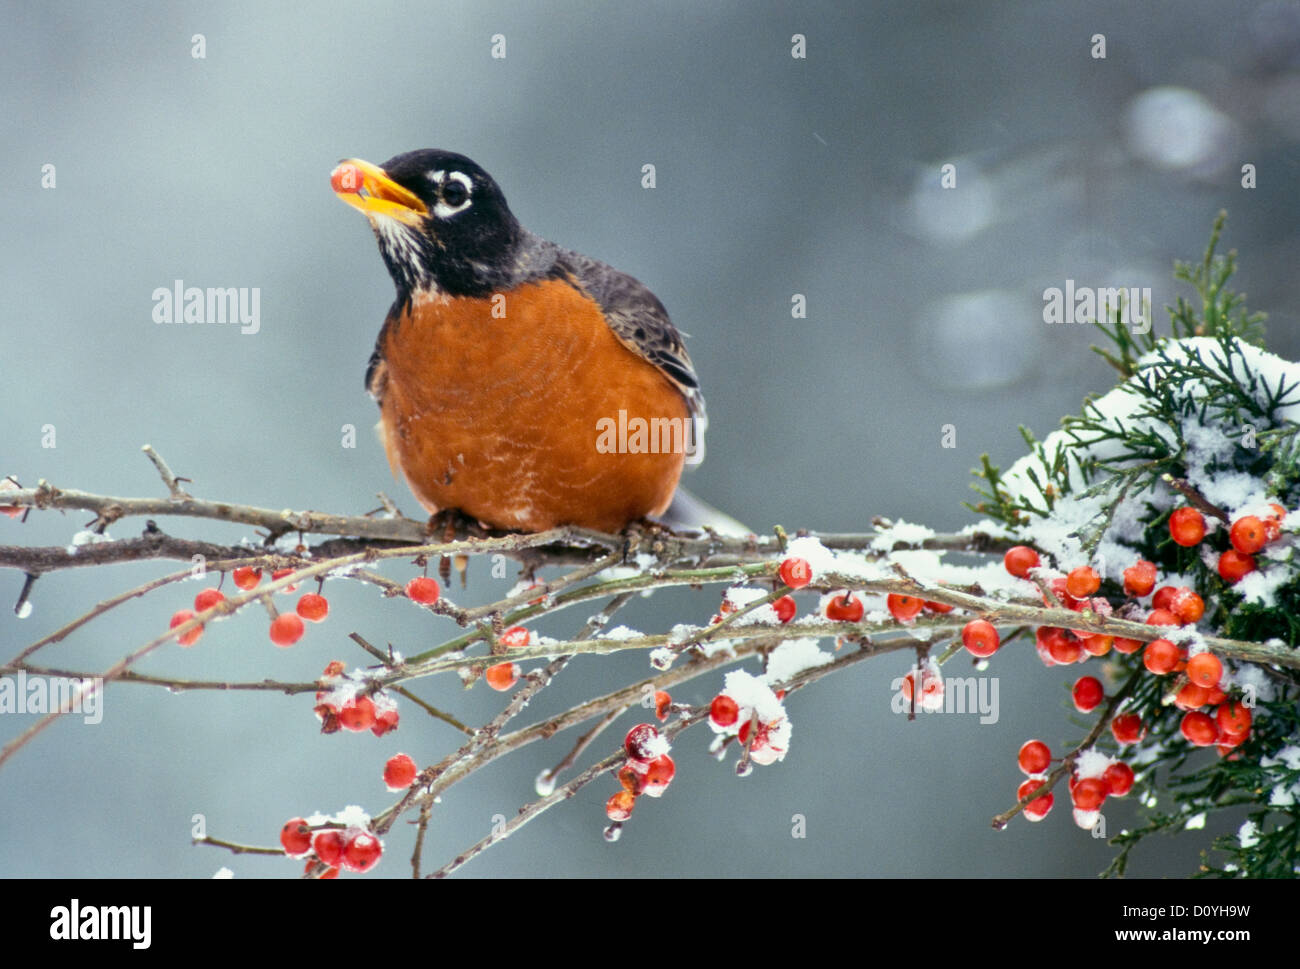 An American robin, Turdus migratorius, perches on snowy winter branch of holly holding berry in mouth, USA Stock Photo